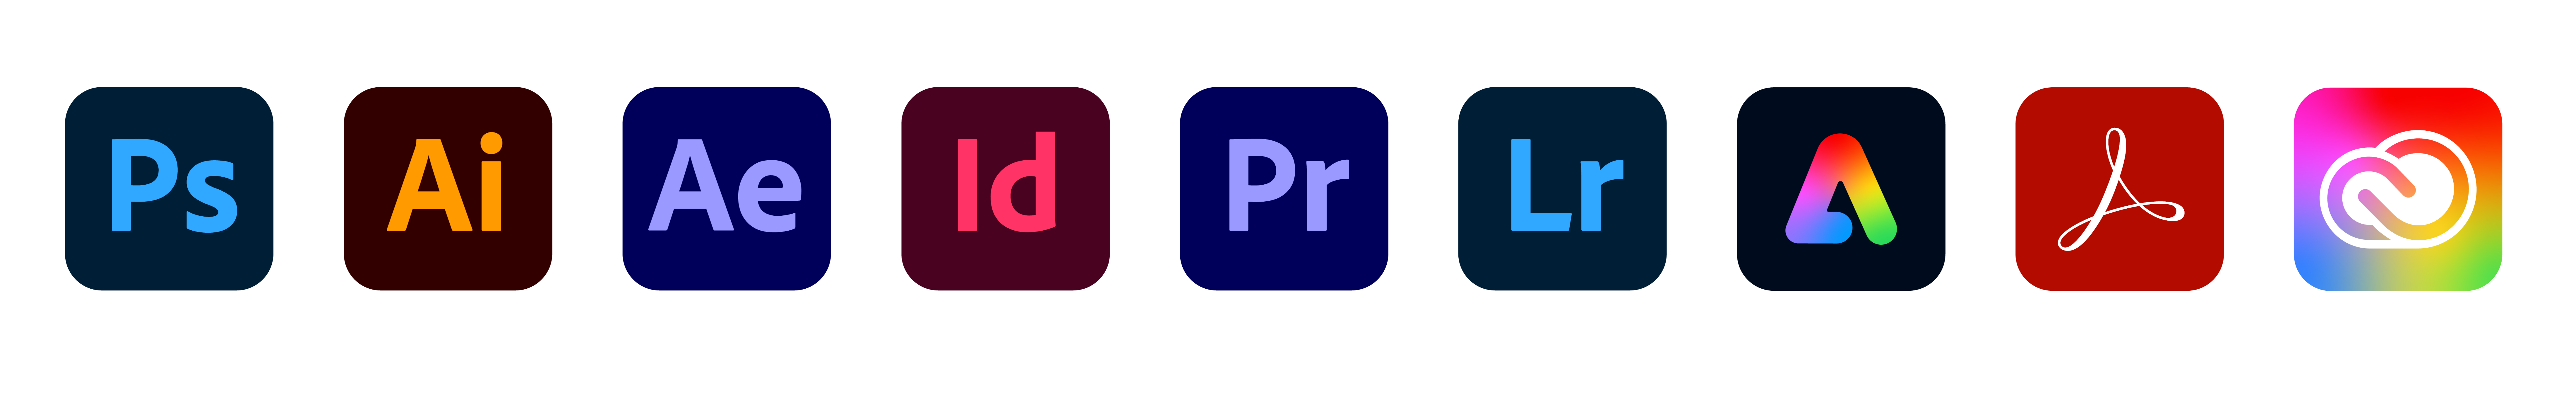 A row of Adobe icons, including Photoshop, Illustrator, Premiere, Creative Cloud and Acrobat